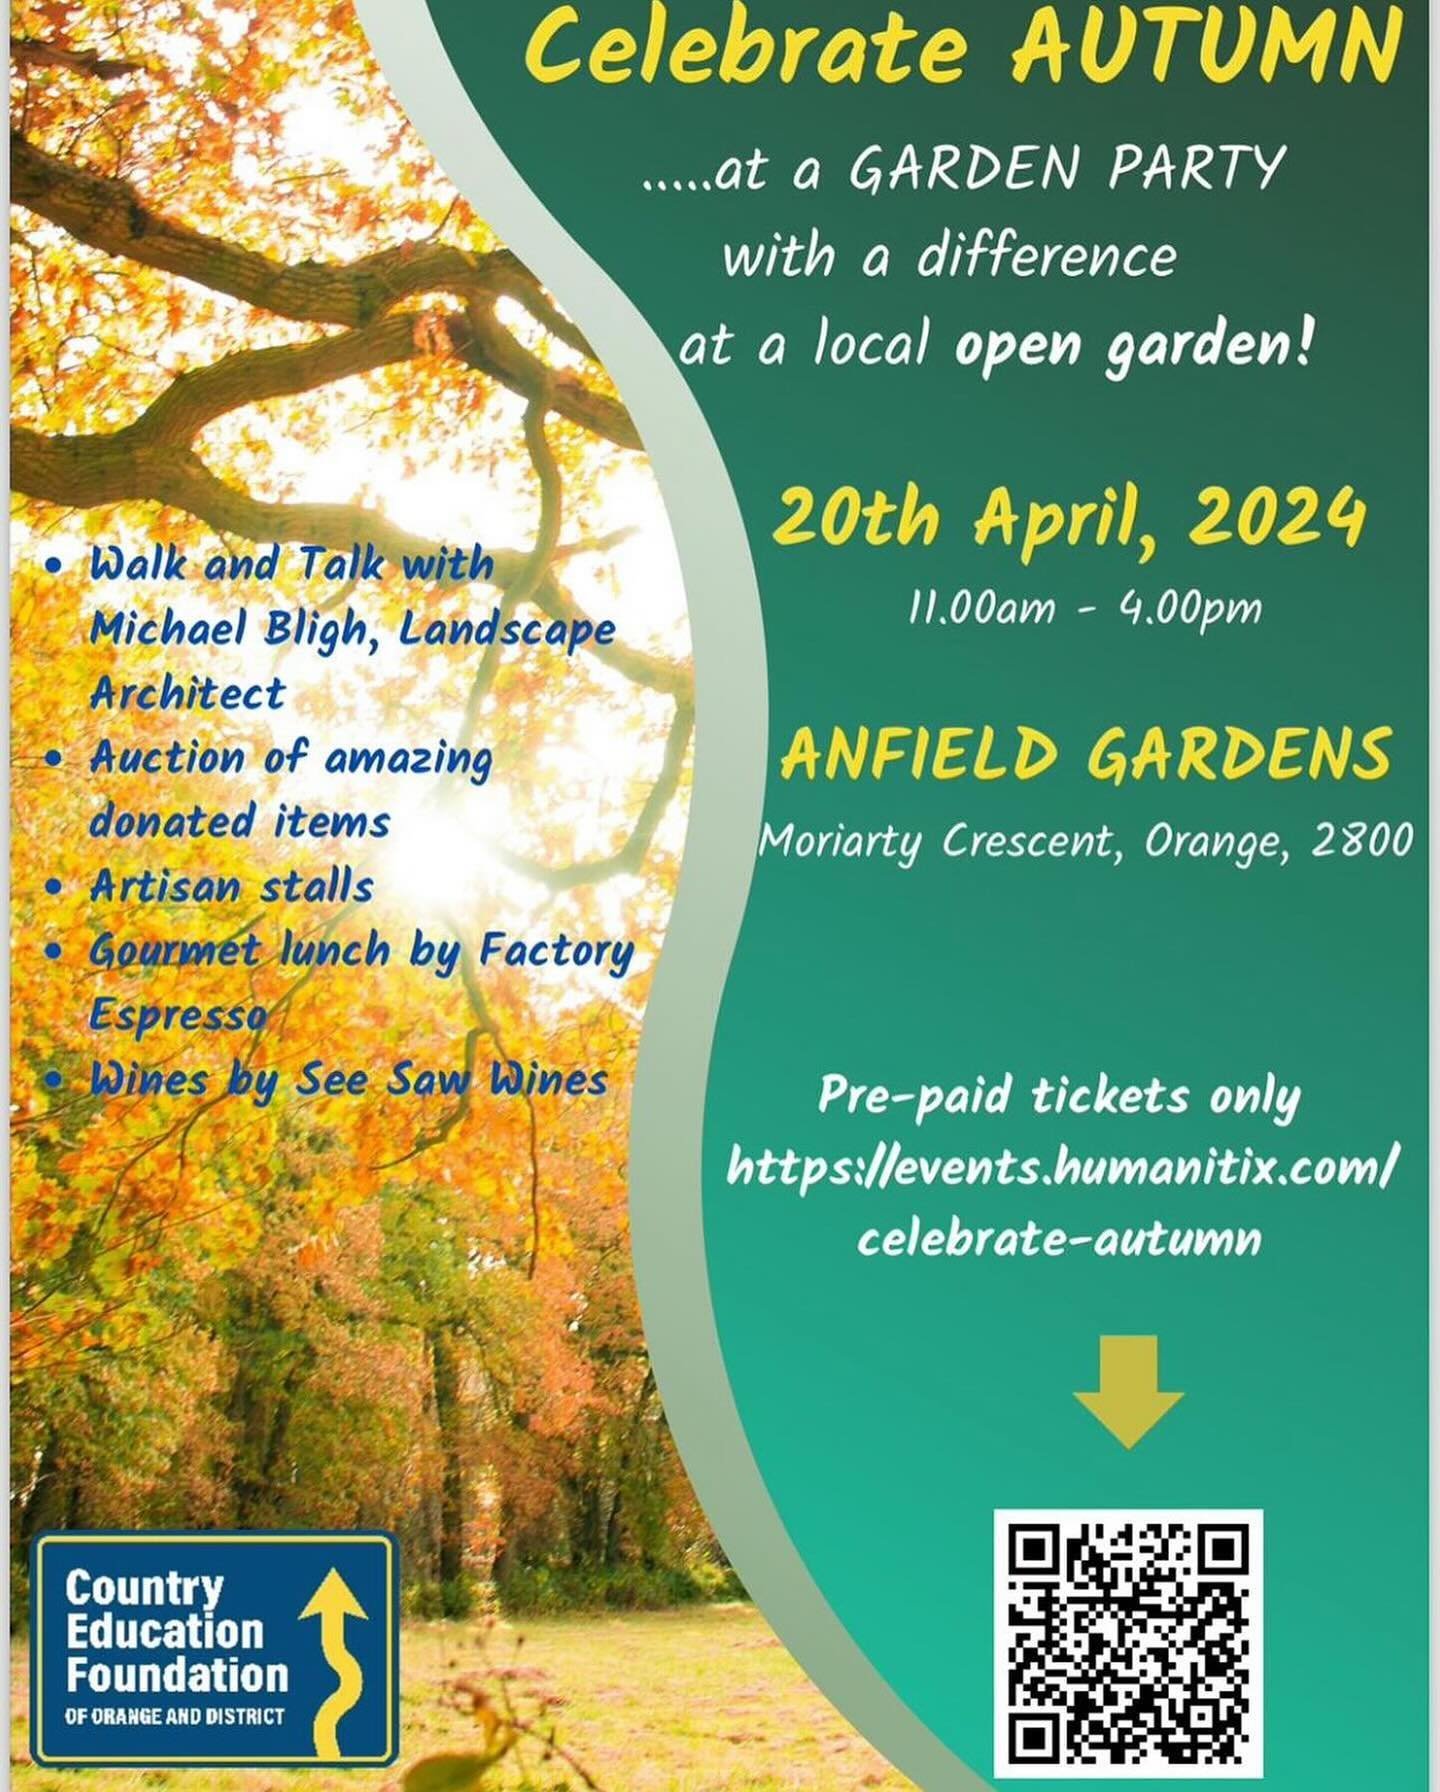 Celebrate Autumn at a garden party with a difference on Saturday 20th April. 

Enjoy a wander in one of Orange&rsquo;s most impressive and formal gardens @anfieldgardens, mix with other plant enthusiasts, listen to the garden design knowledge and exp